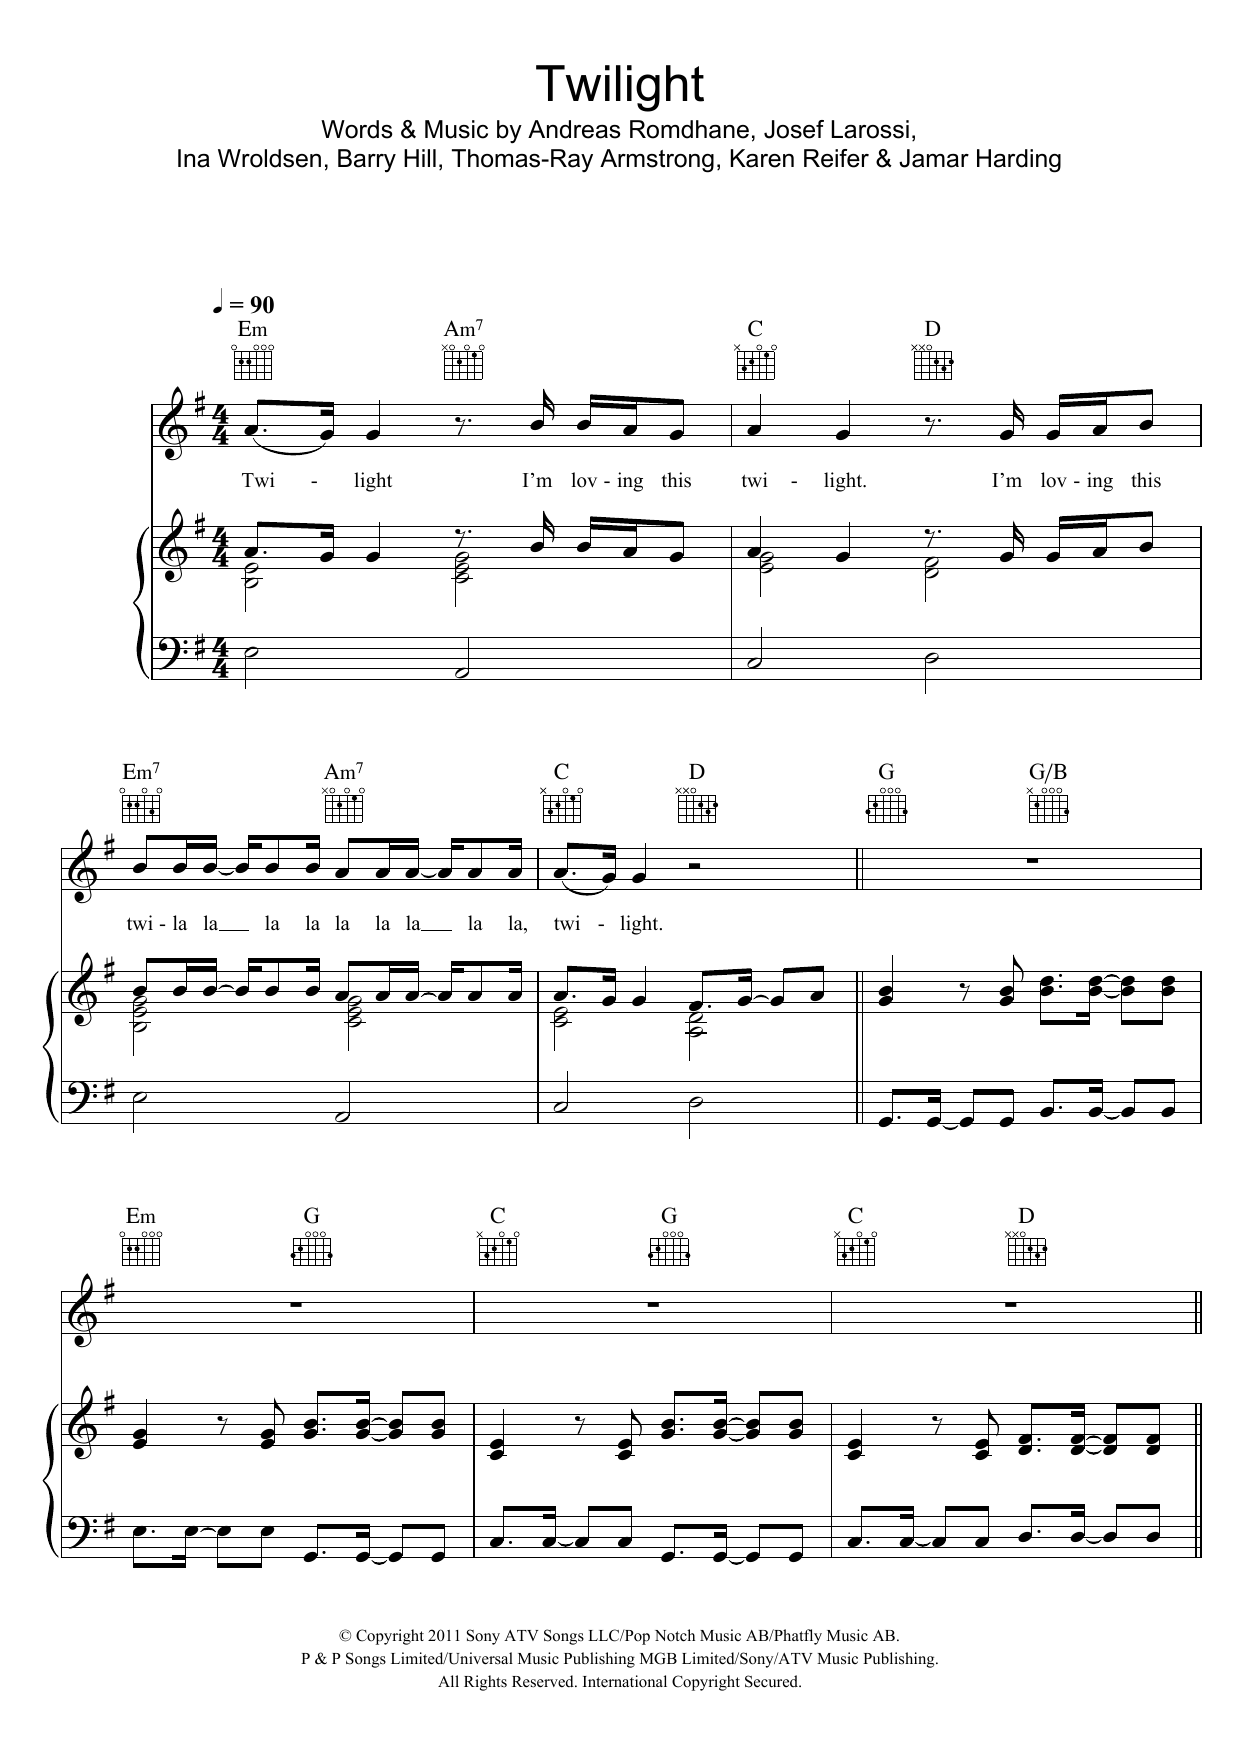 Download Cover Drive Twilight Sheet Music